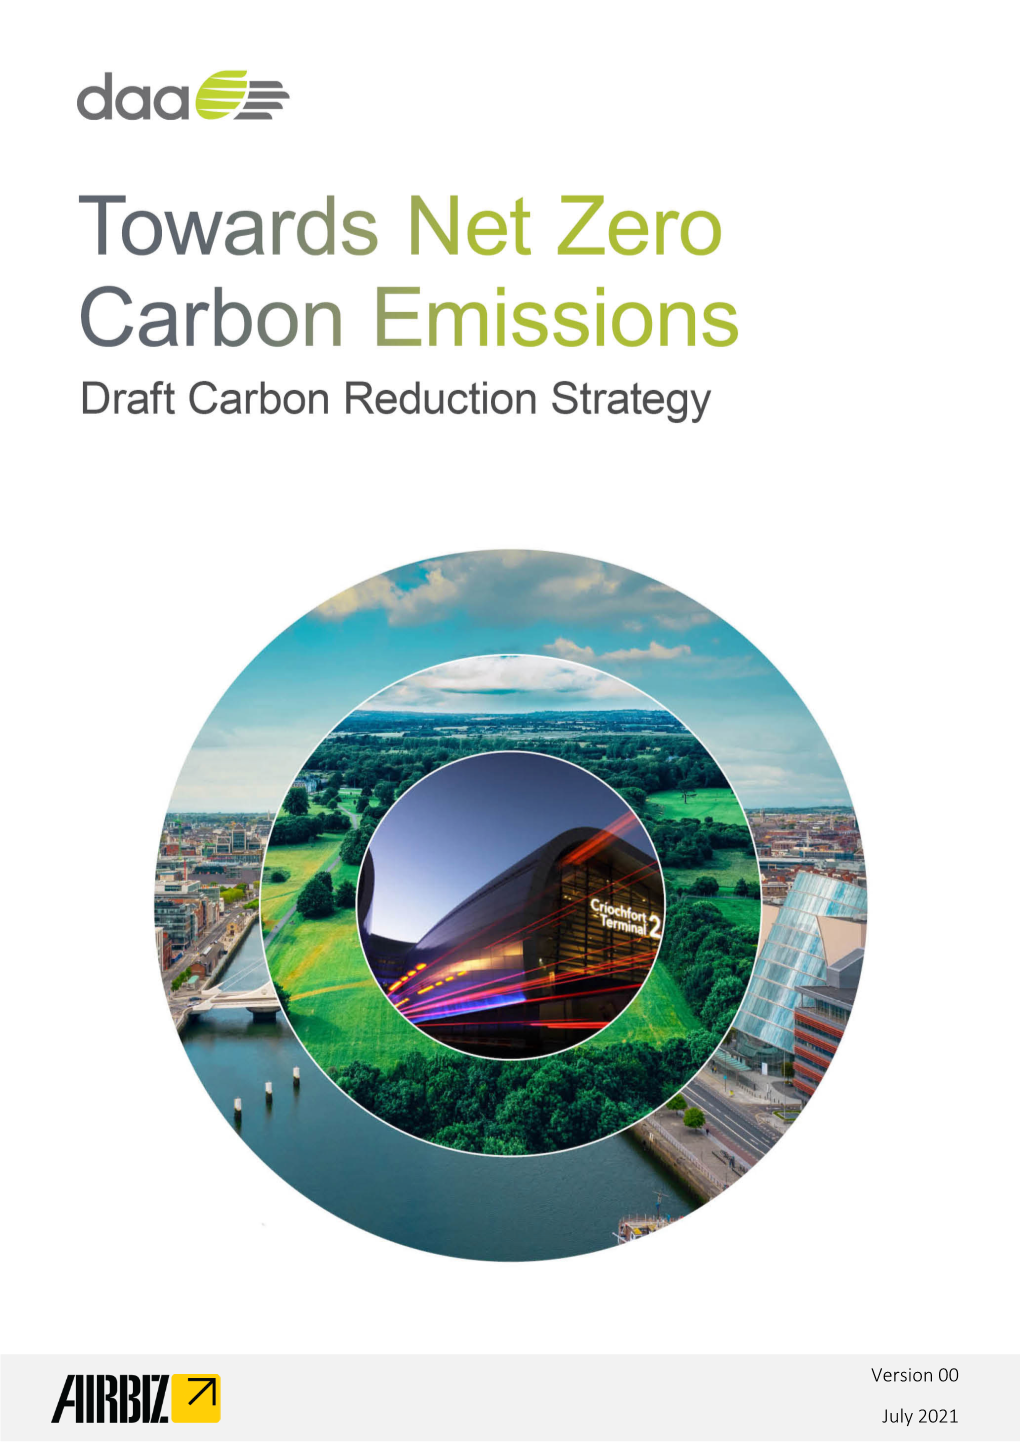 Dublin Airport Draft Carbon Reduction Strategy PDF 6061 KB